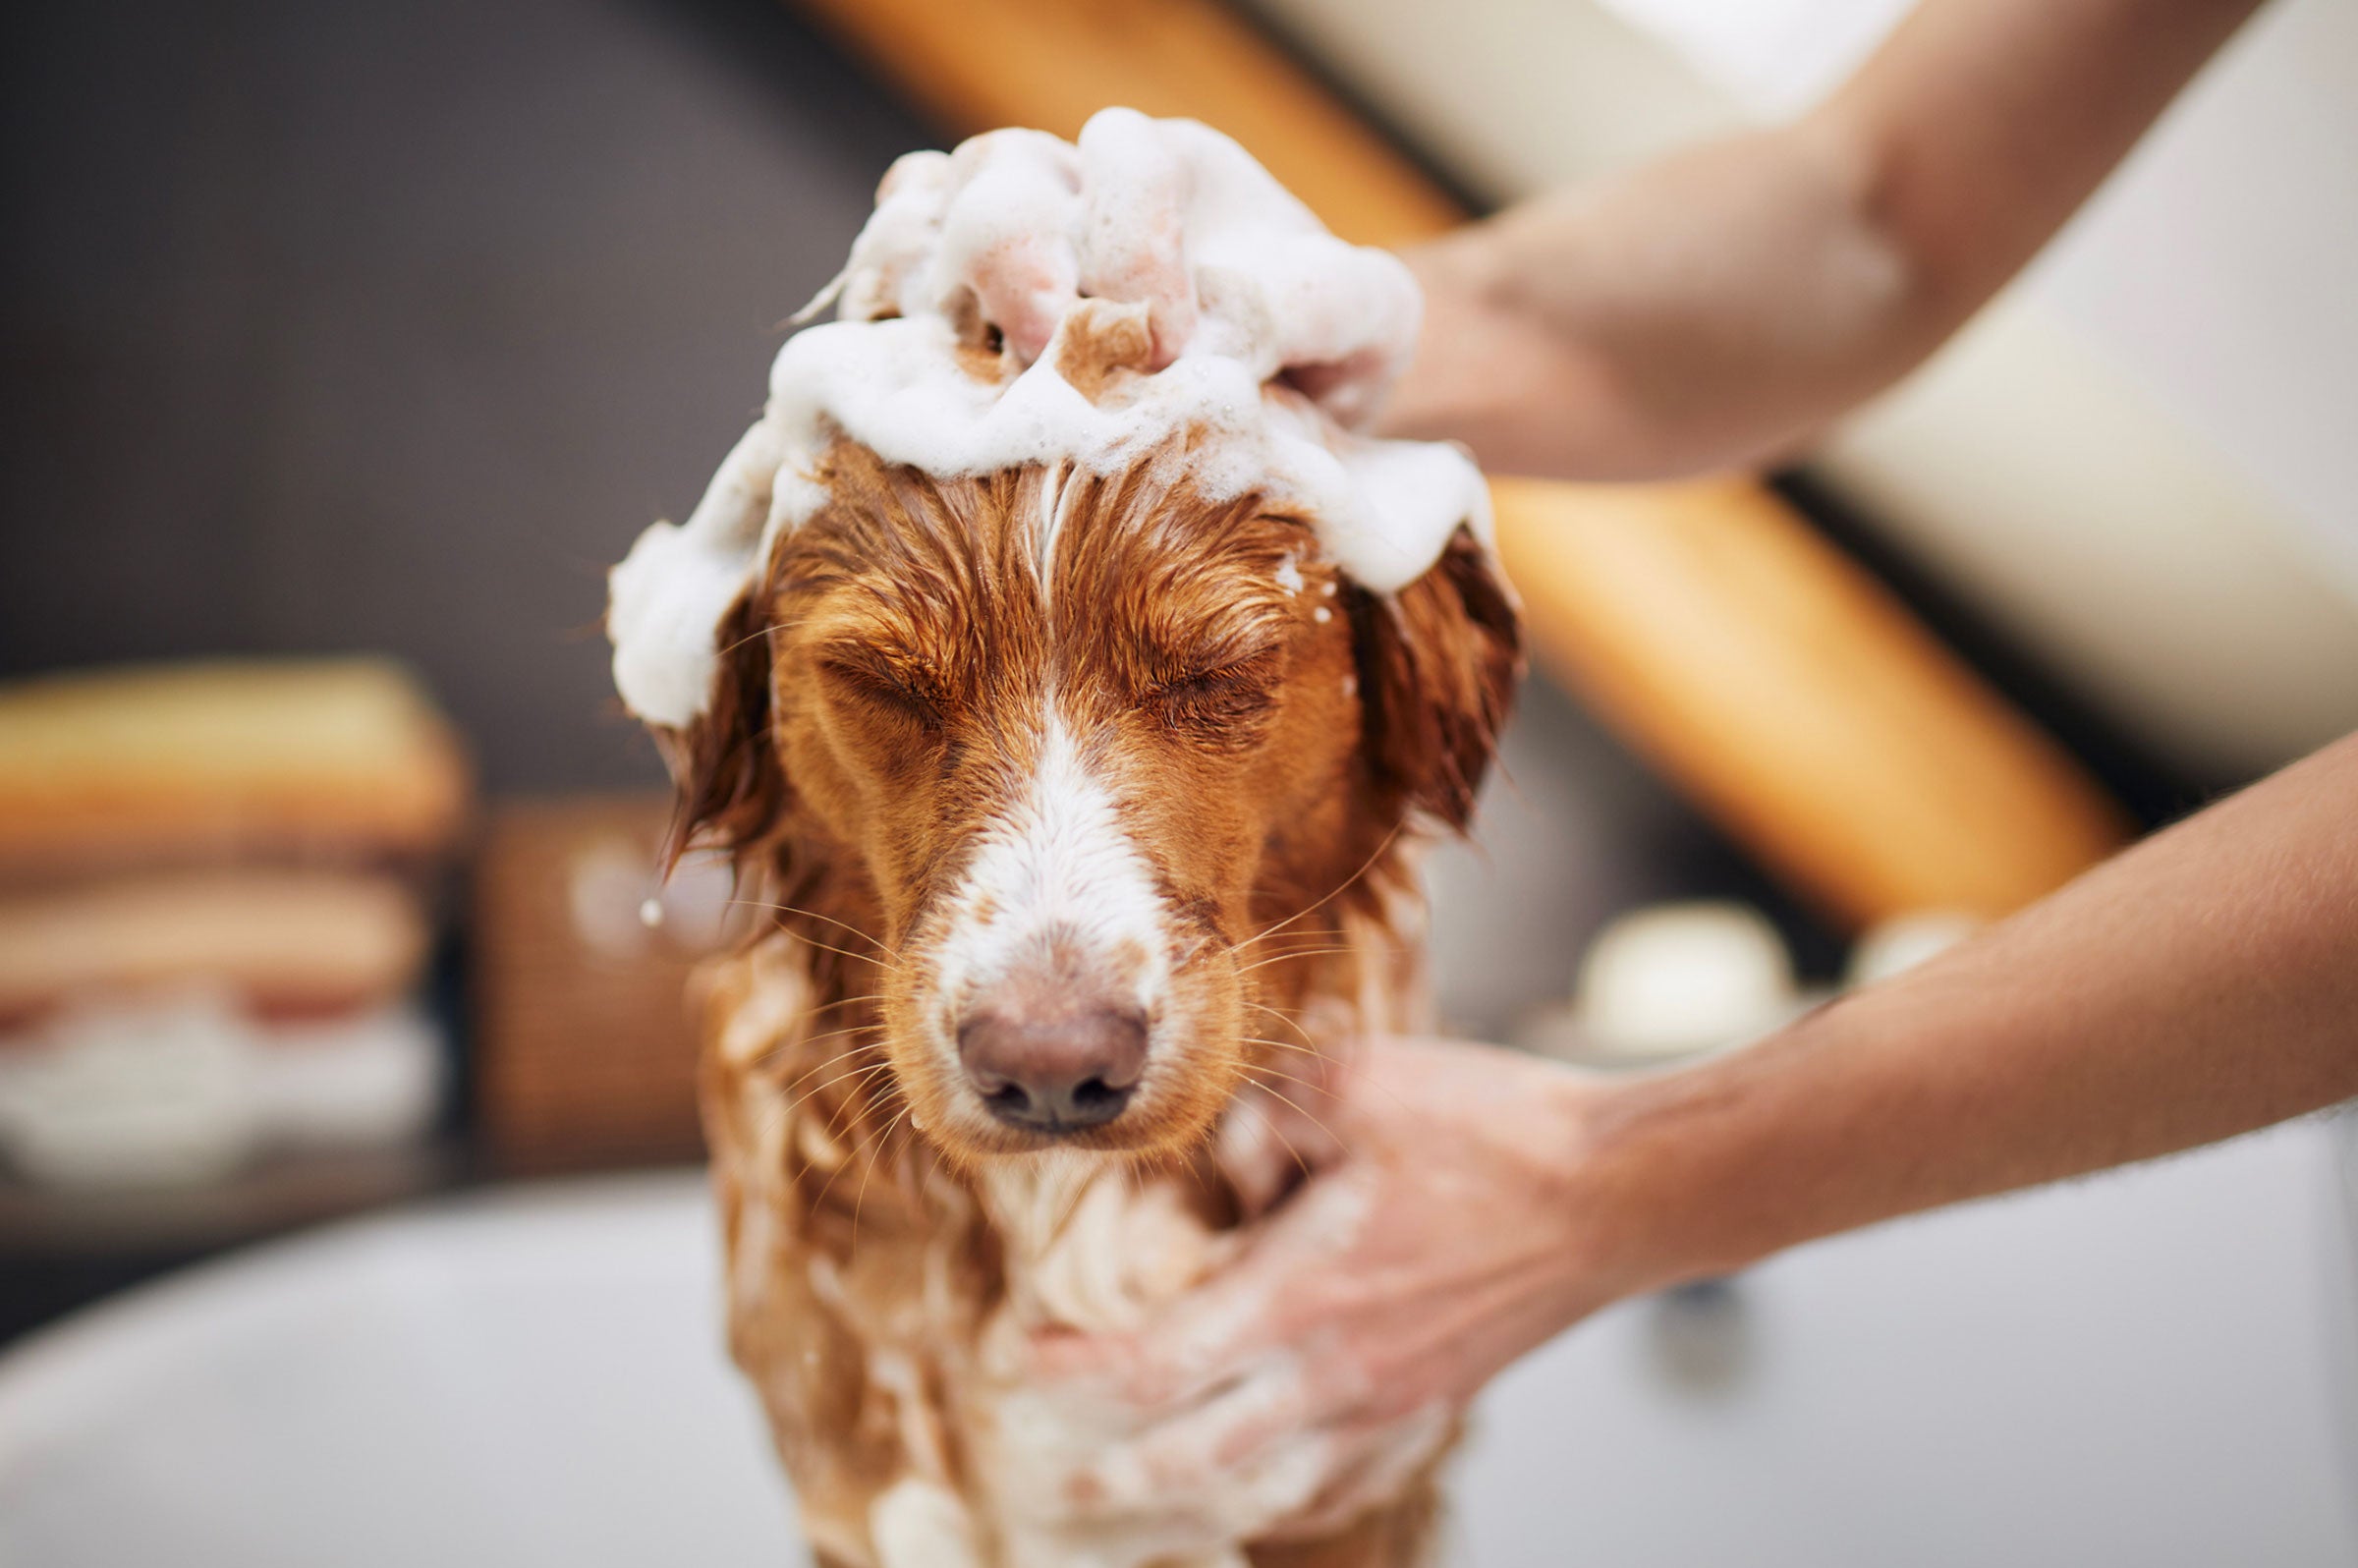 Why You Shouldn't Wash Your Dogs with Dawn Dish Soap